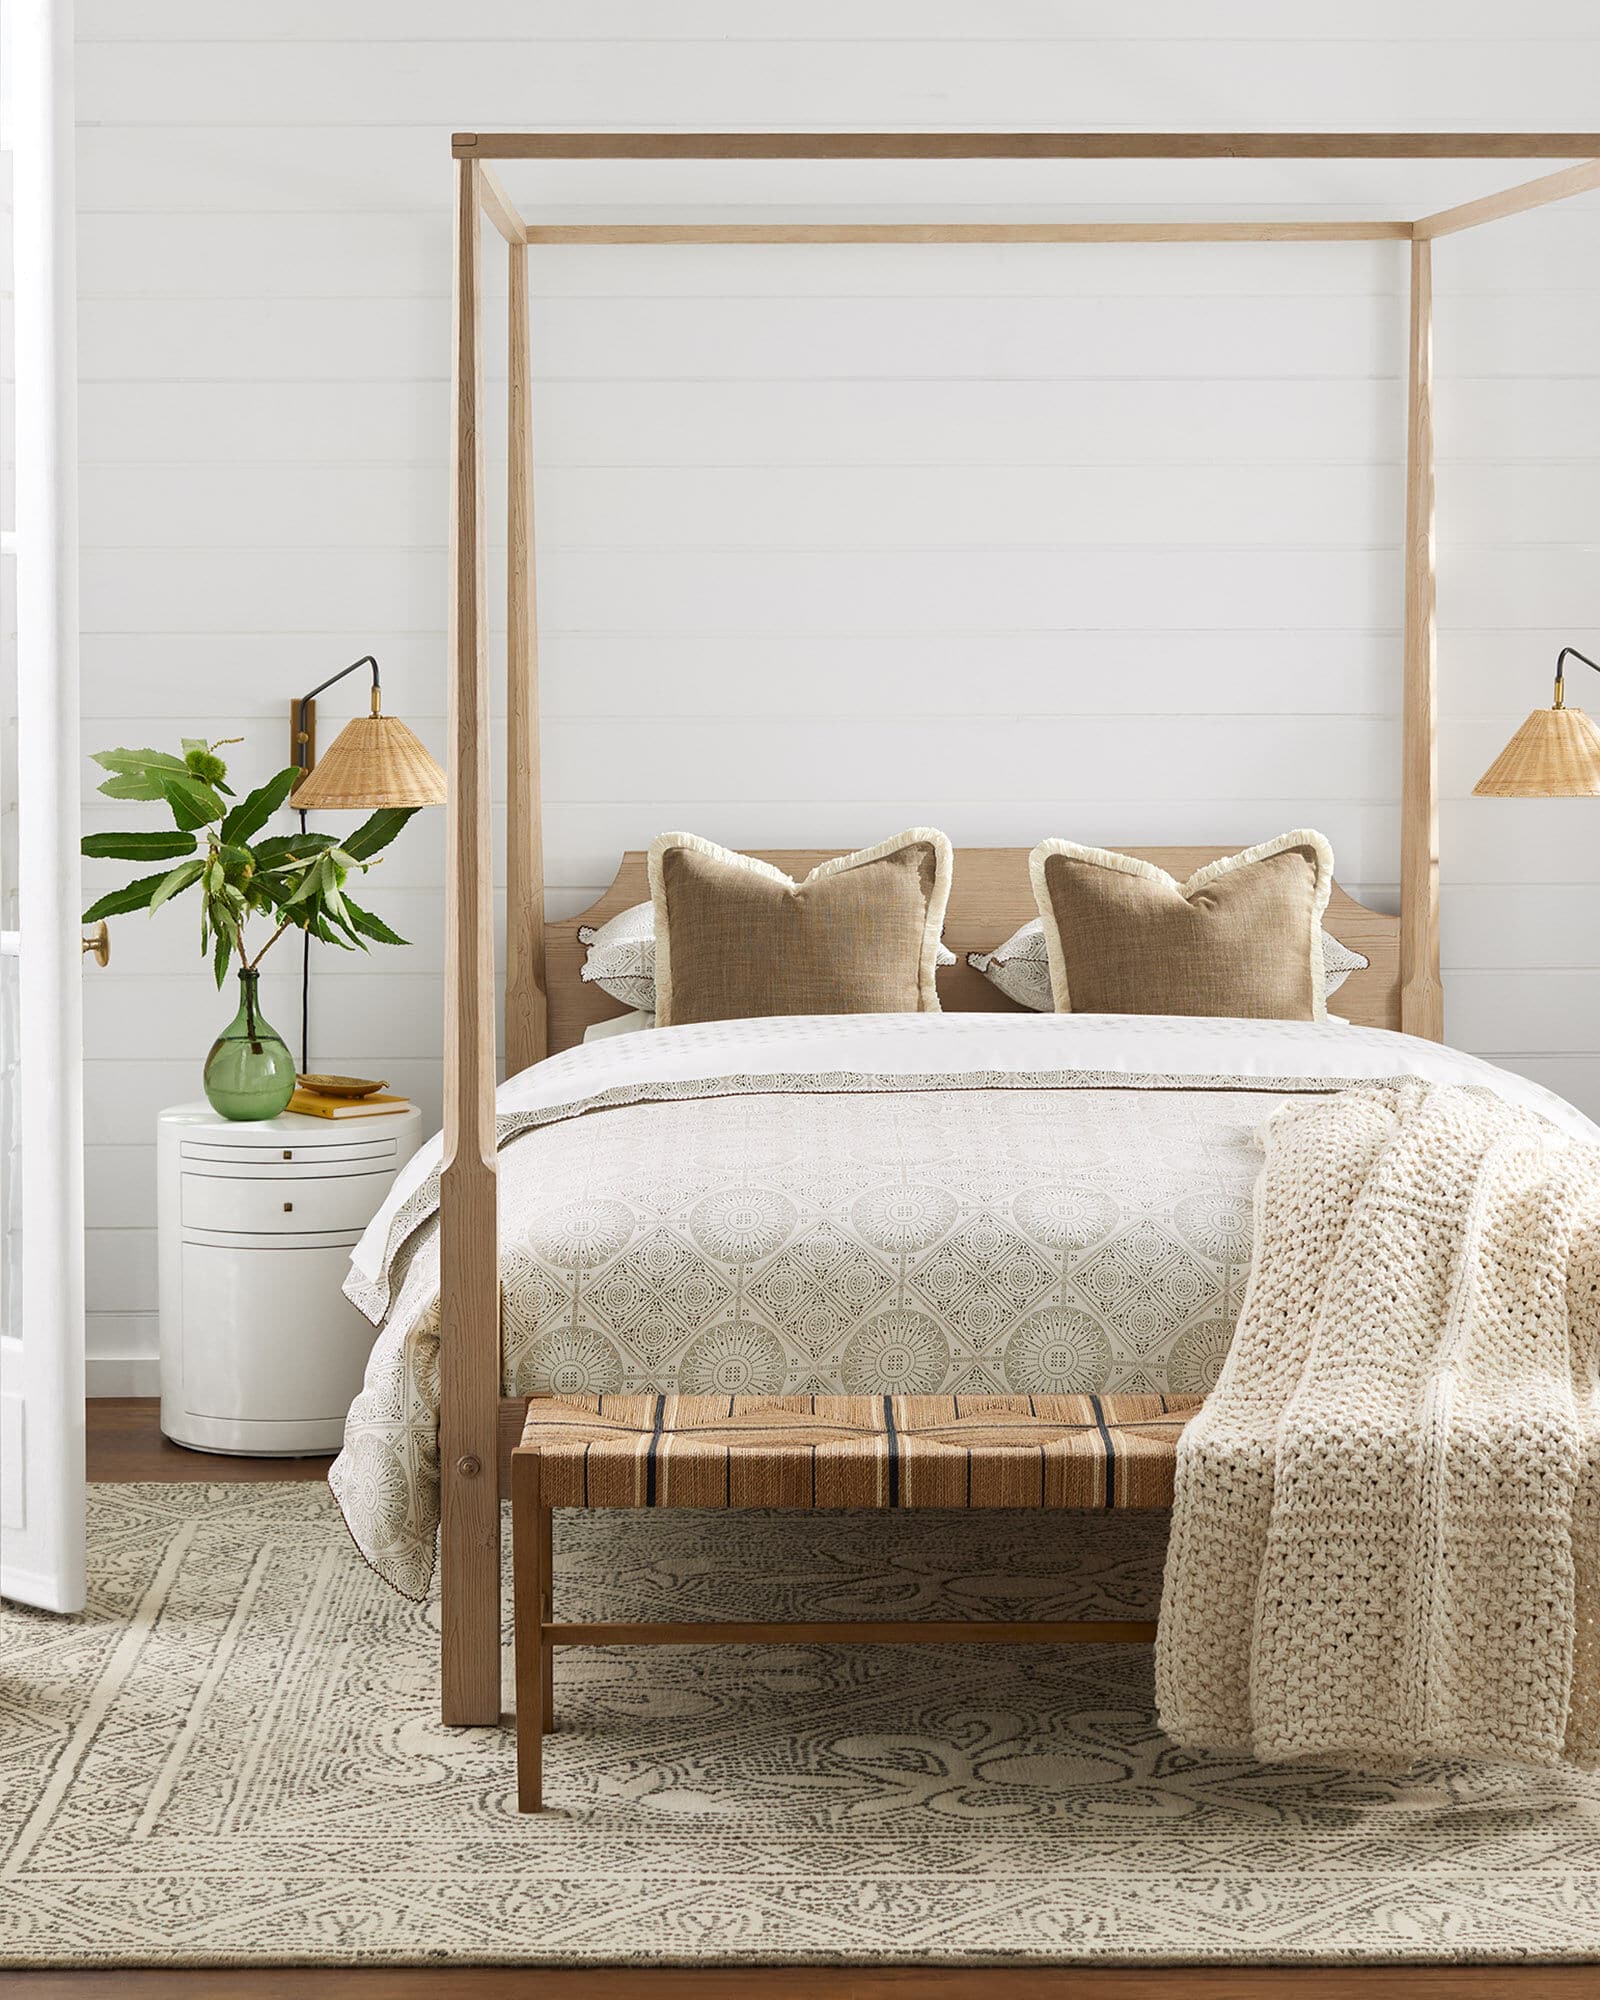 Serena & Lily Whitaker Four Poster Bed | Sunbleached Pine -guest room 